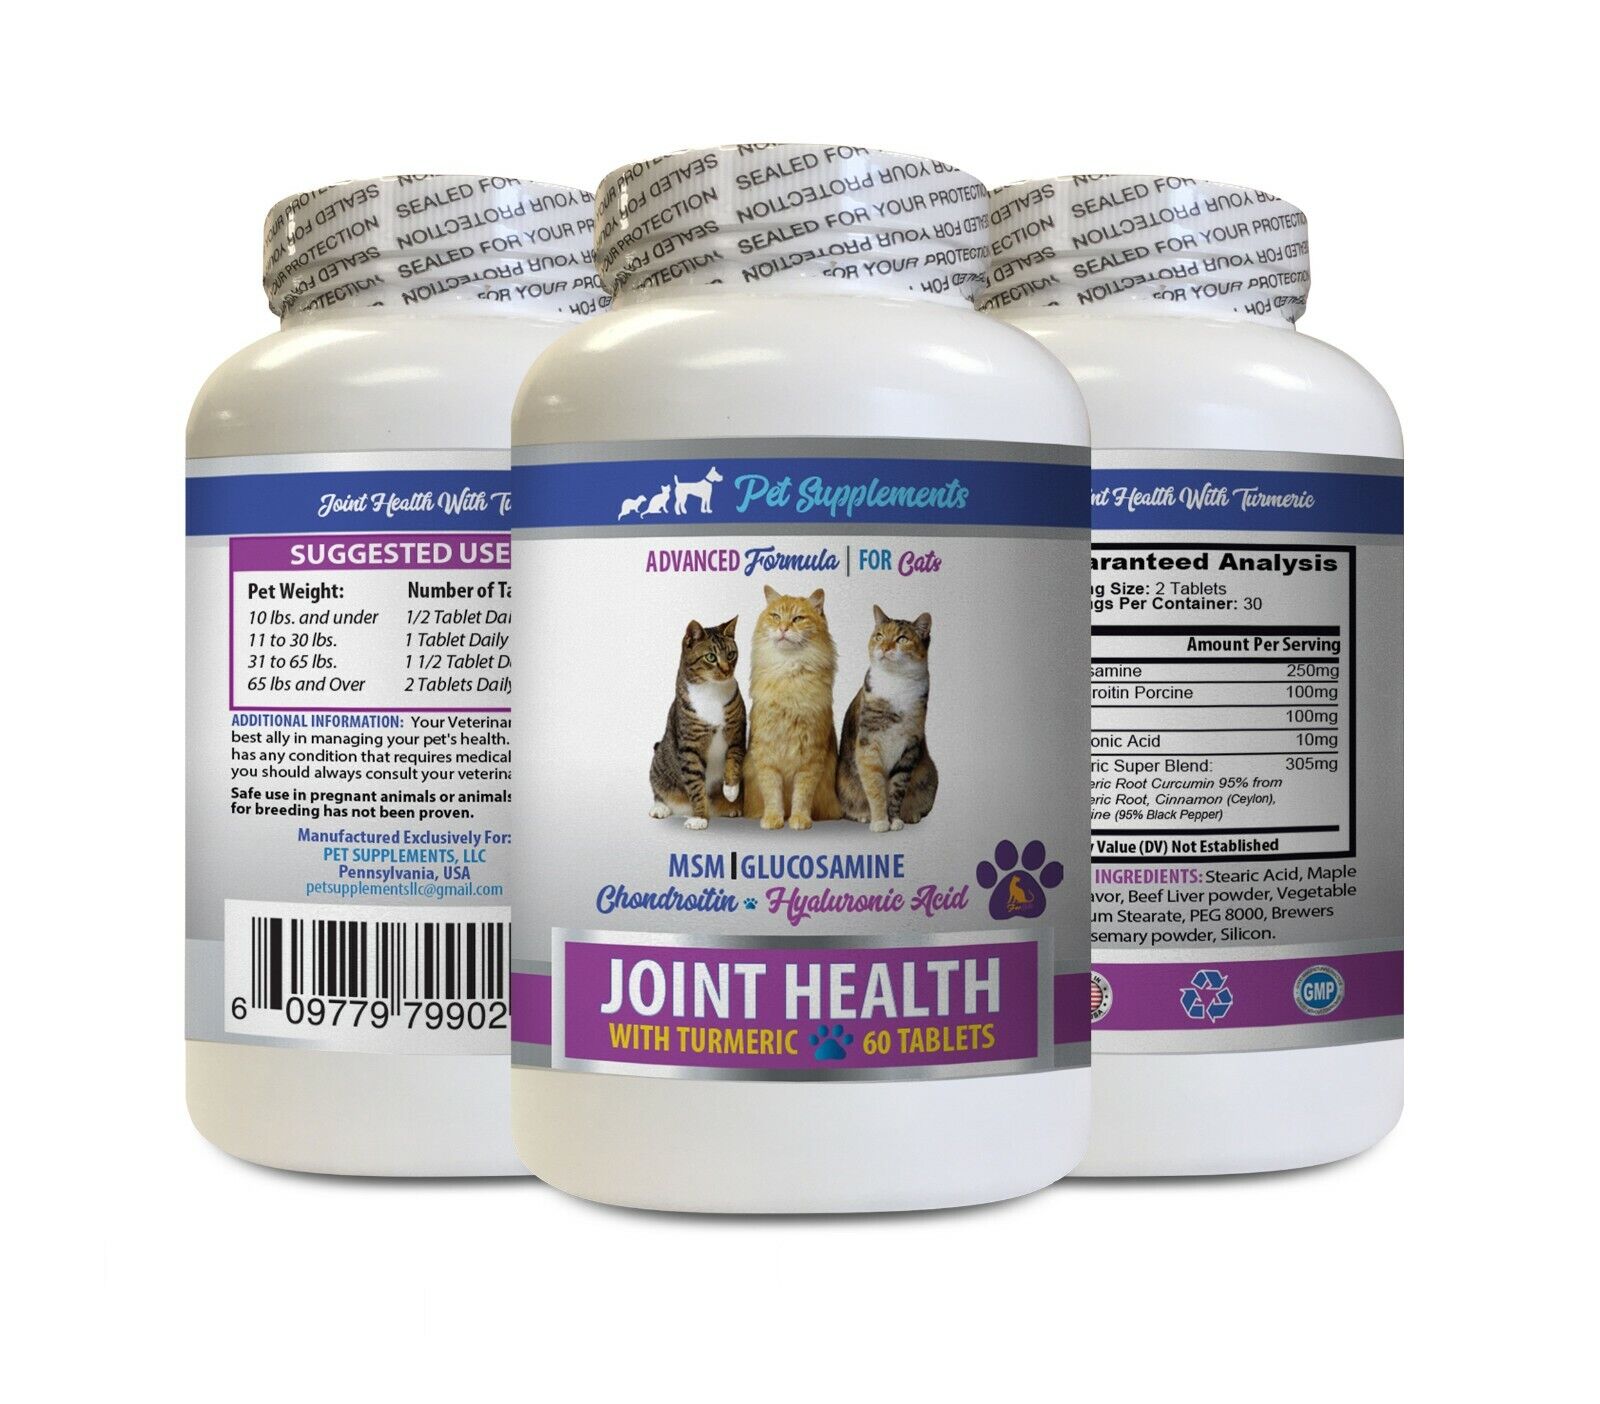 joint health for cats - CAT Over item handling ☆ 1B JOINT FOR gluco HEALTH Save money TURMERIC